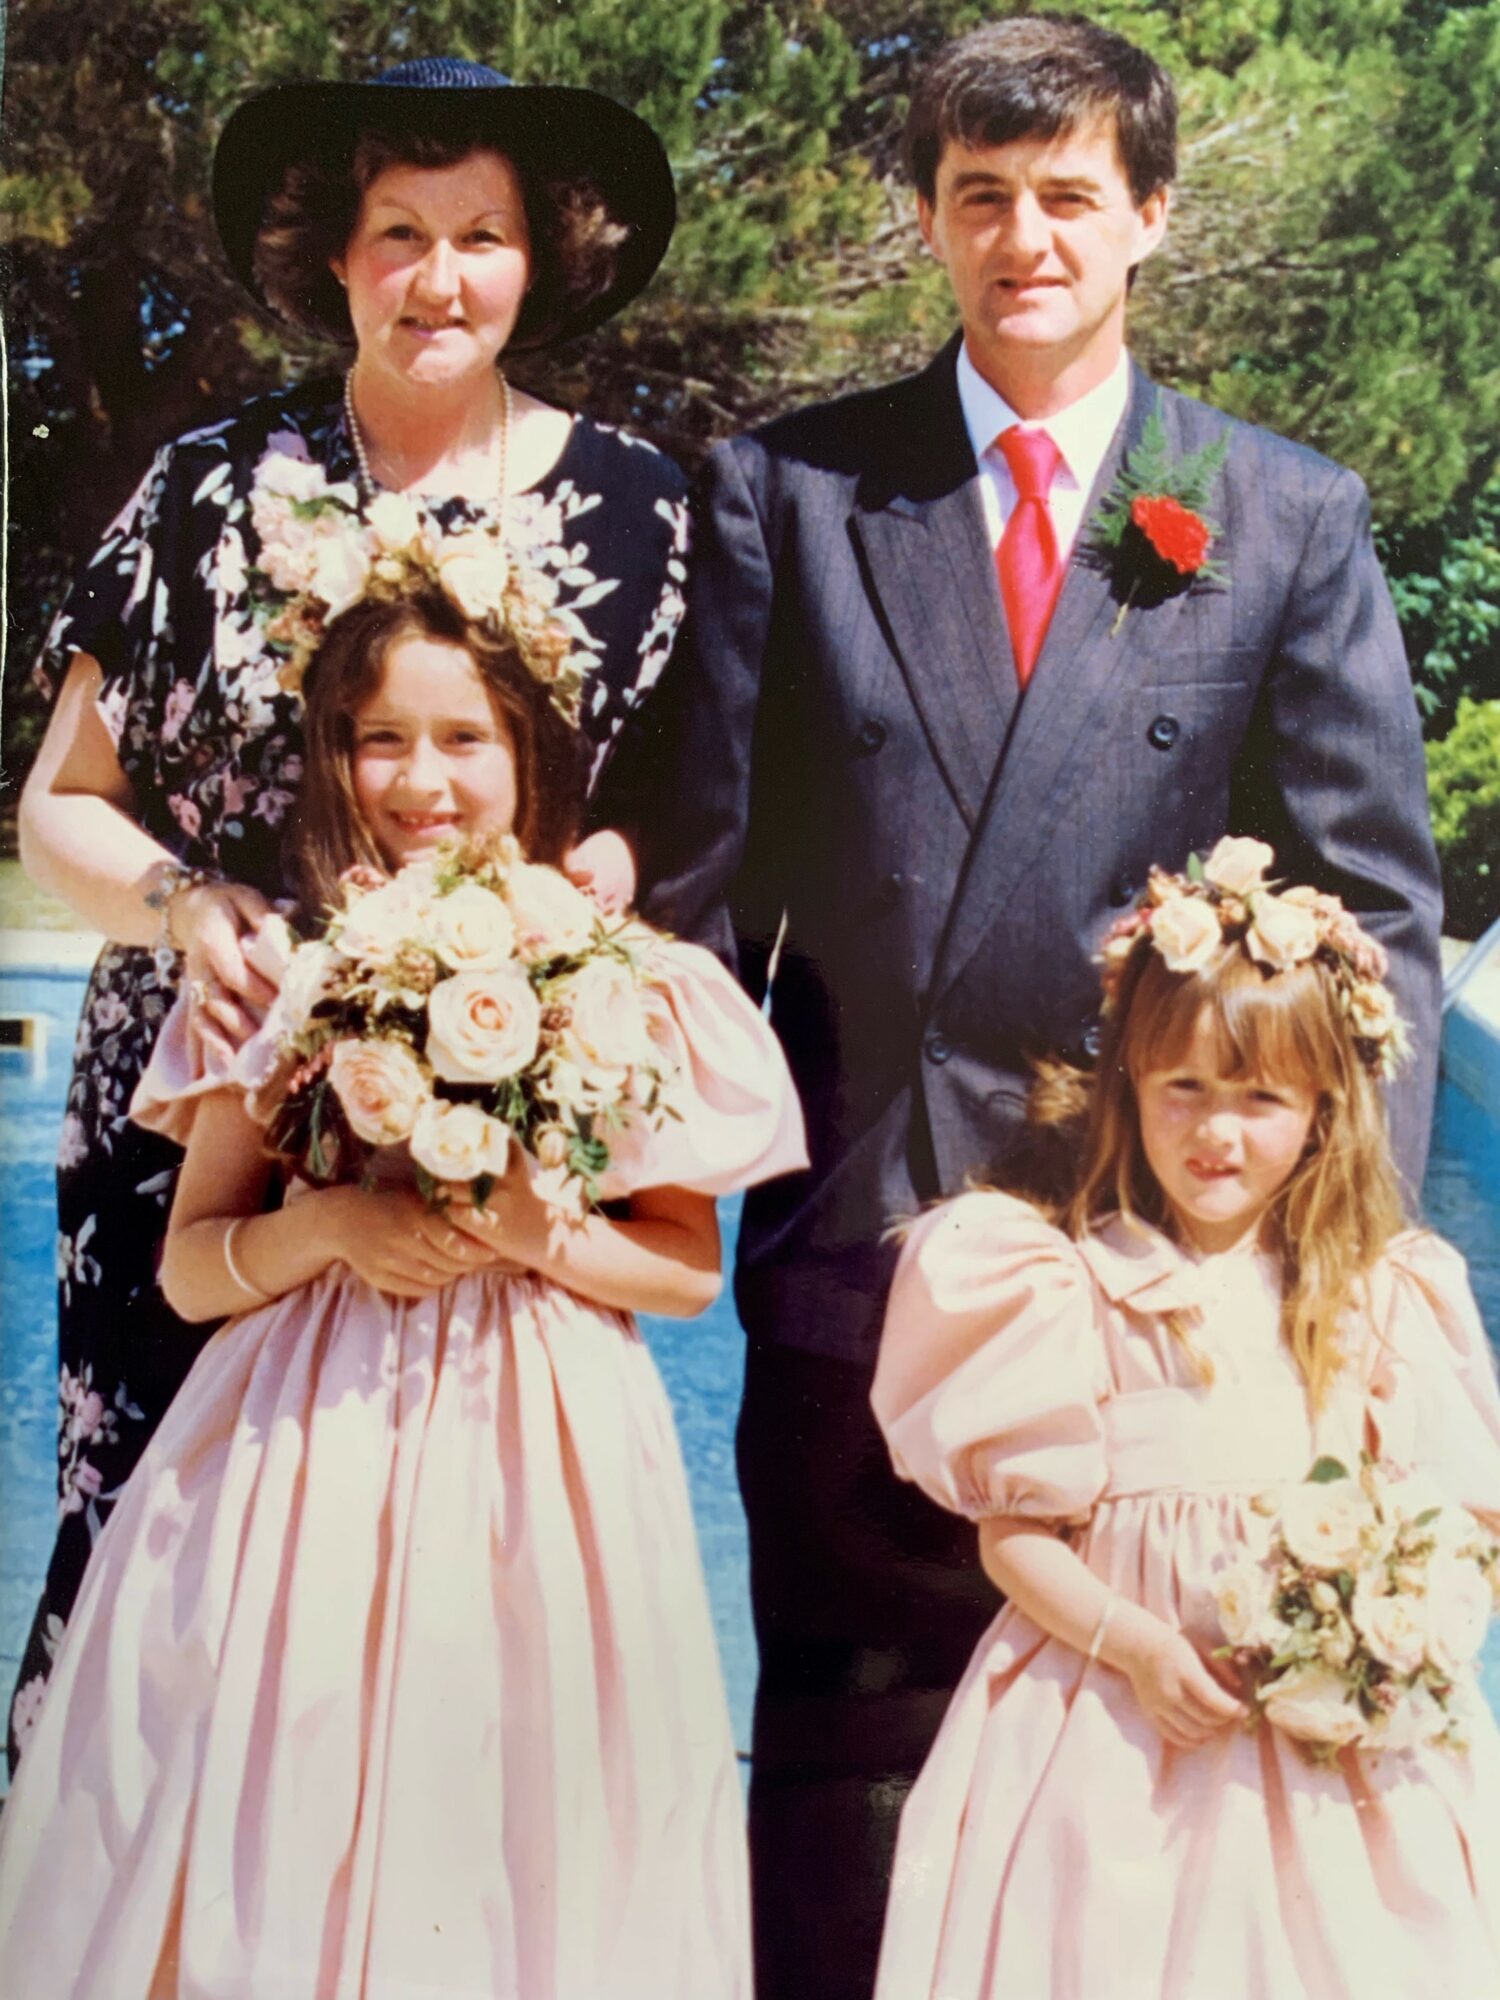 Tracy Thomas as a young bridesmaid (left), pictured with her younger sister Paula, and her mum and dad.